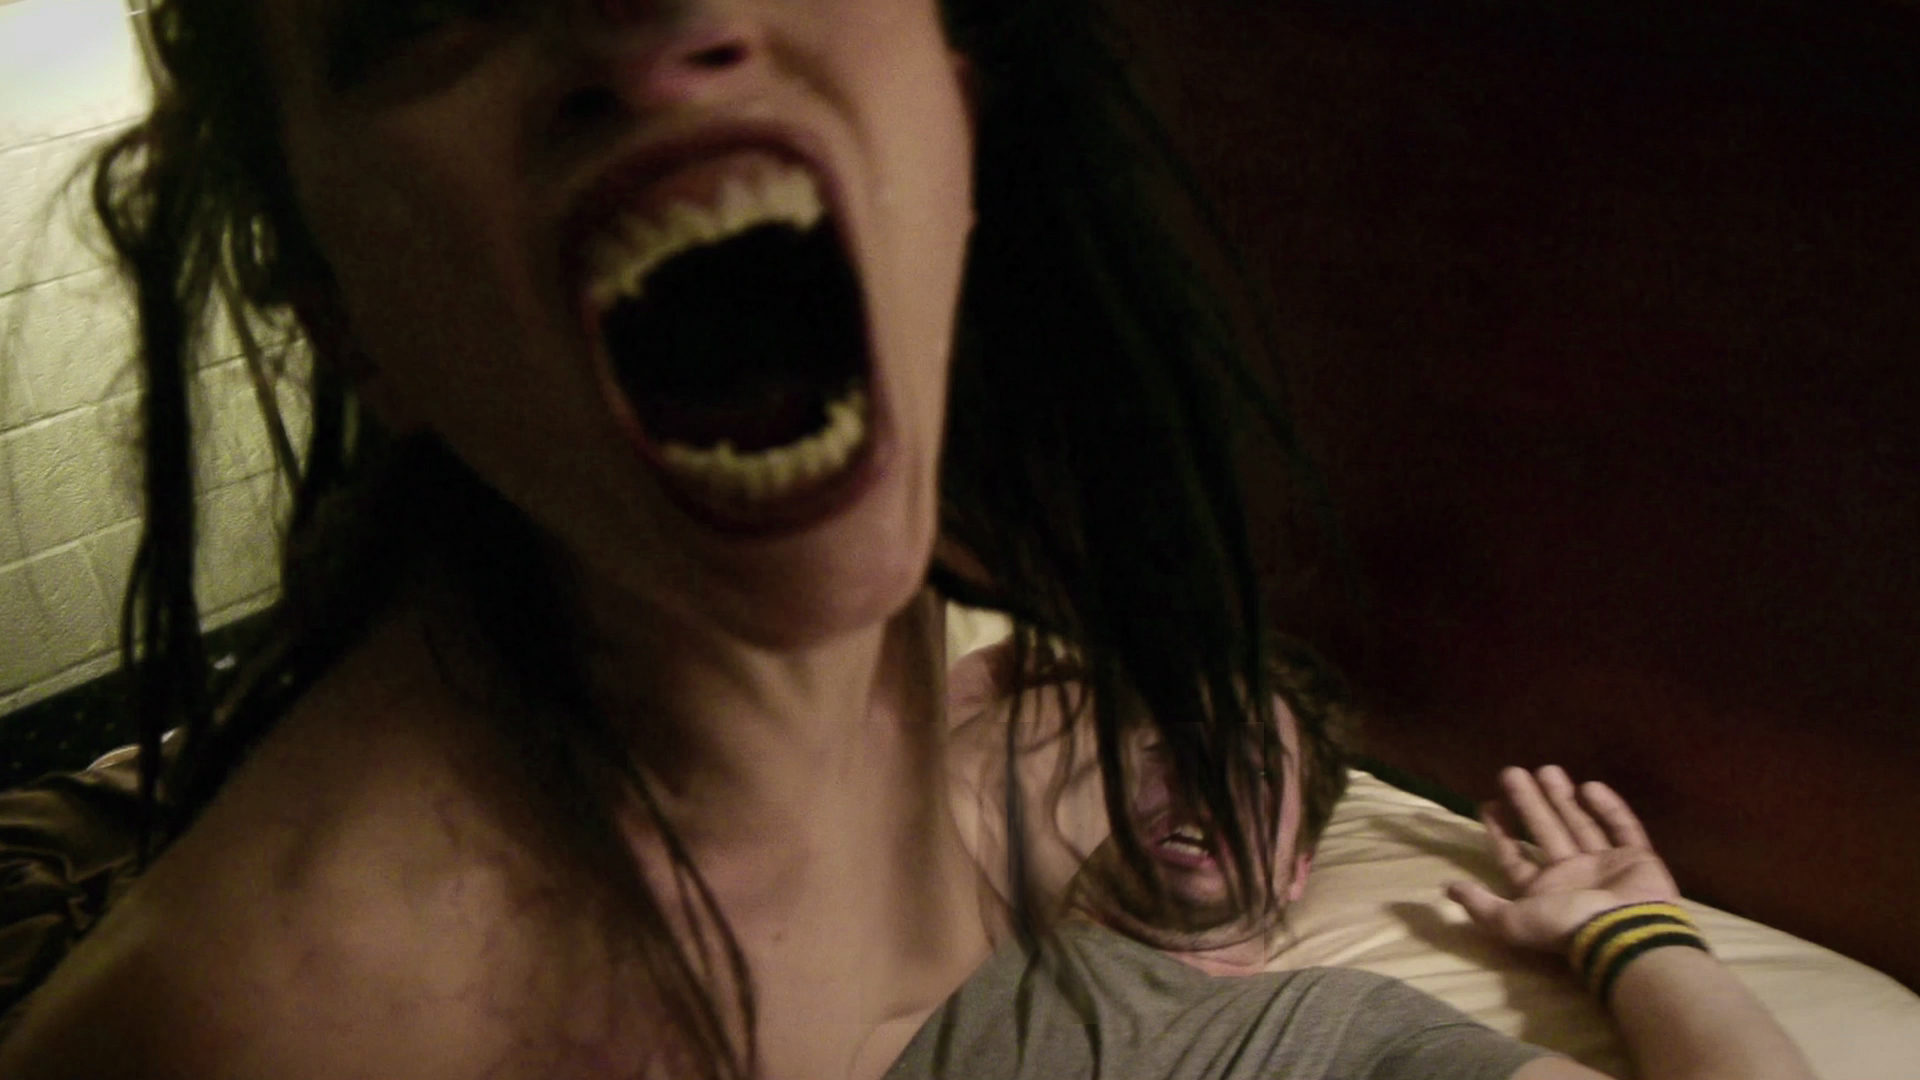 Bloody NSFW Clip From V/H/S Segment pic